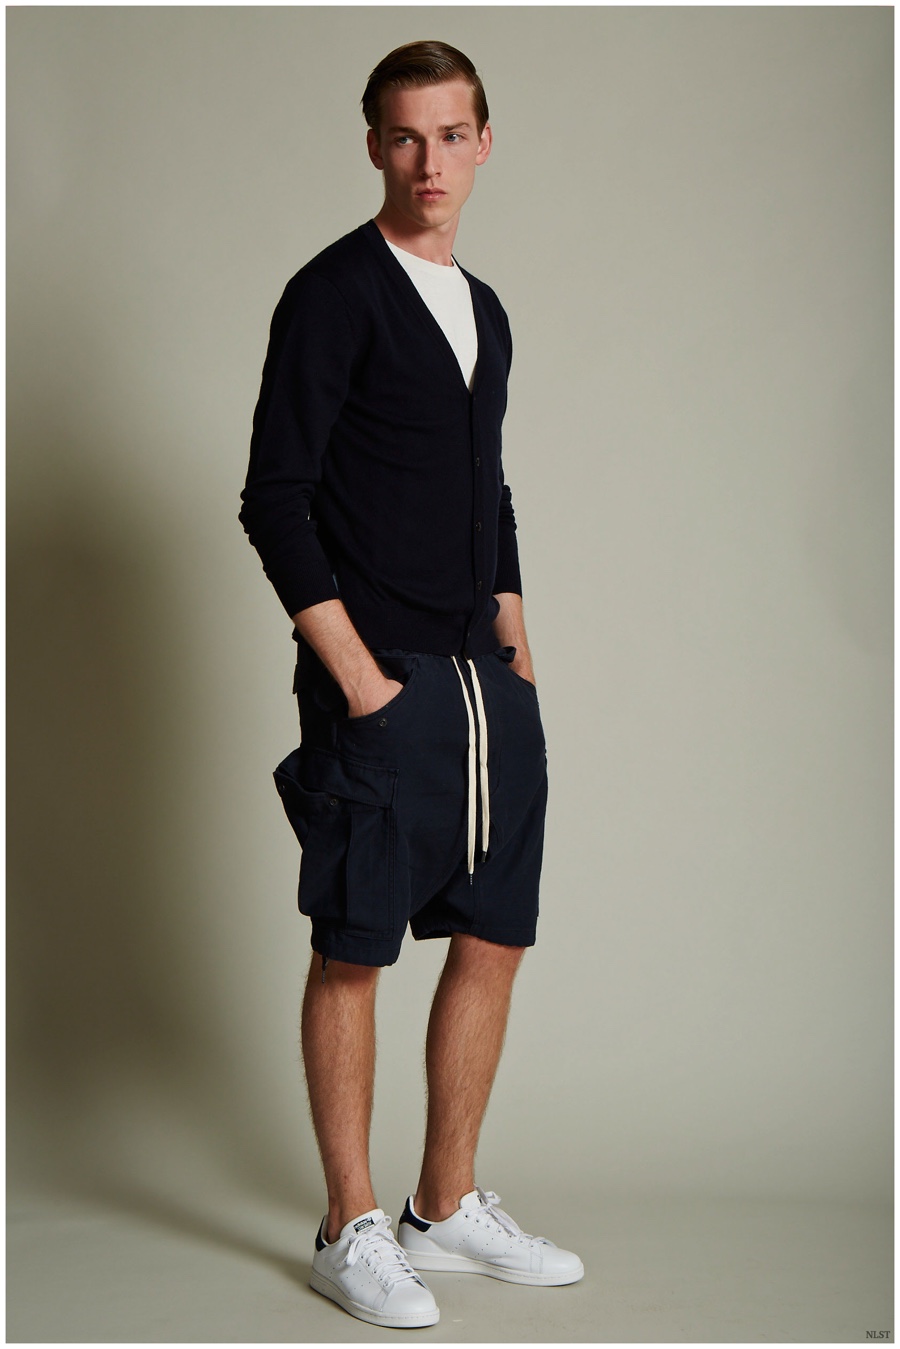 NLST Embraces Navy Inspired Styles for Spring 2015 Collection